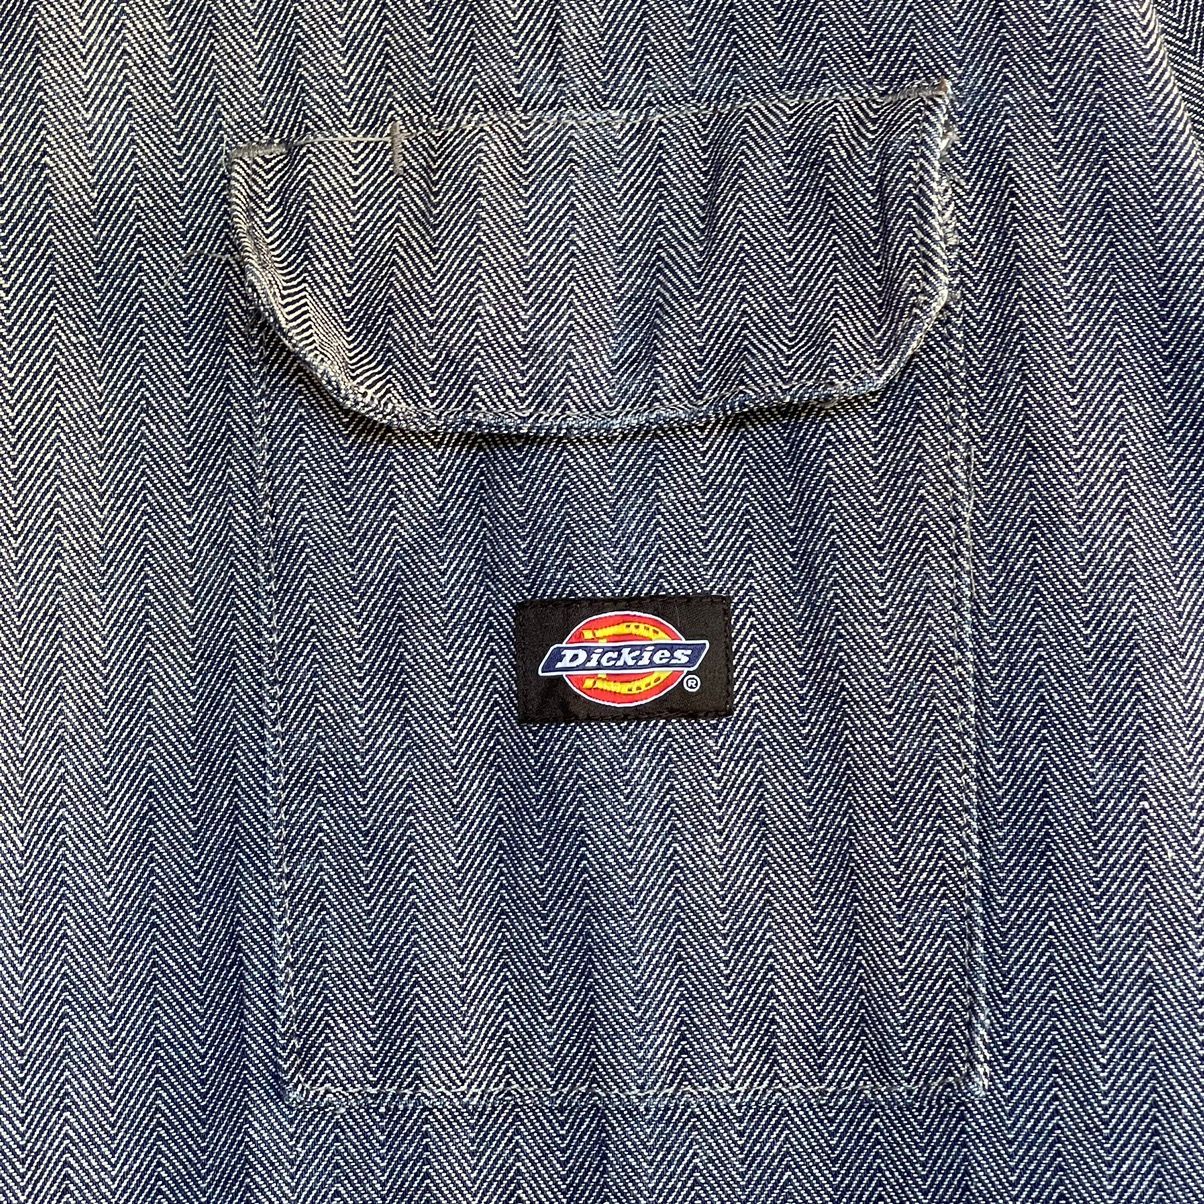 🔥Best Offer🔥 Vintage 90s Dickies Coverall - 4